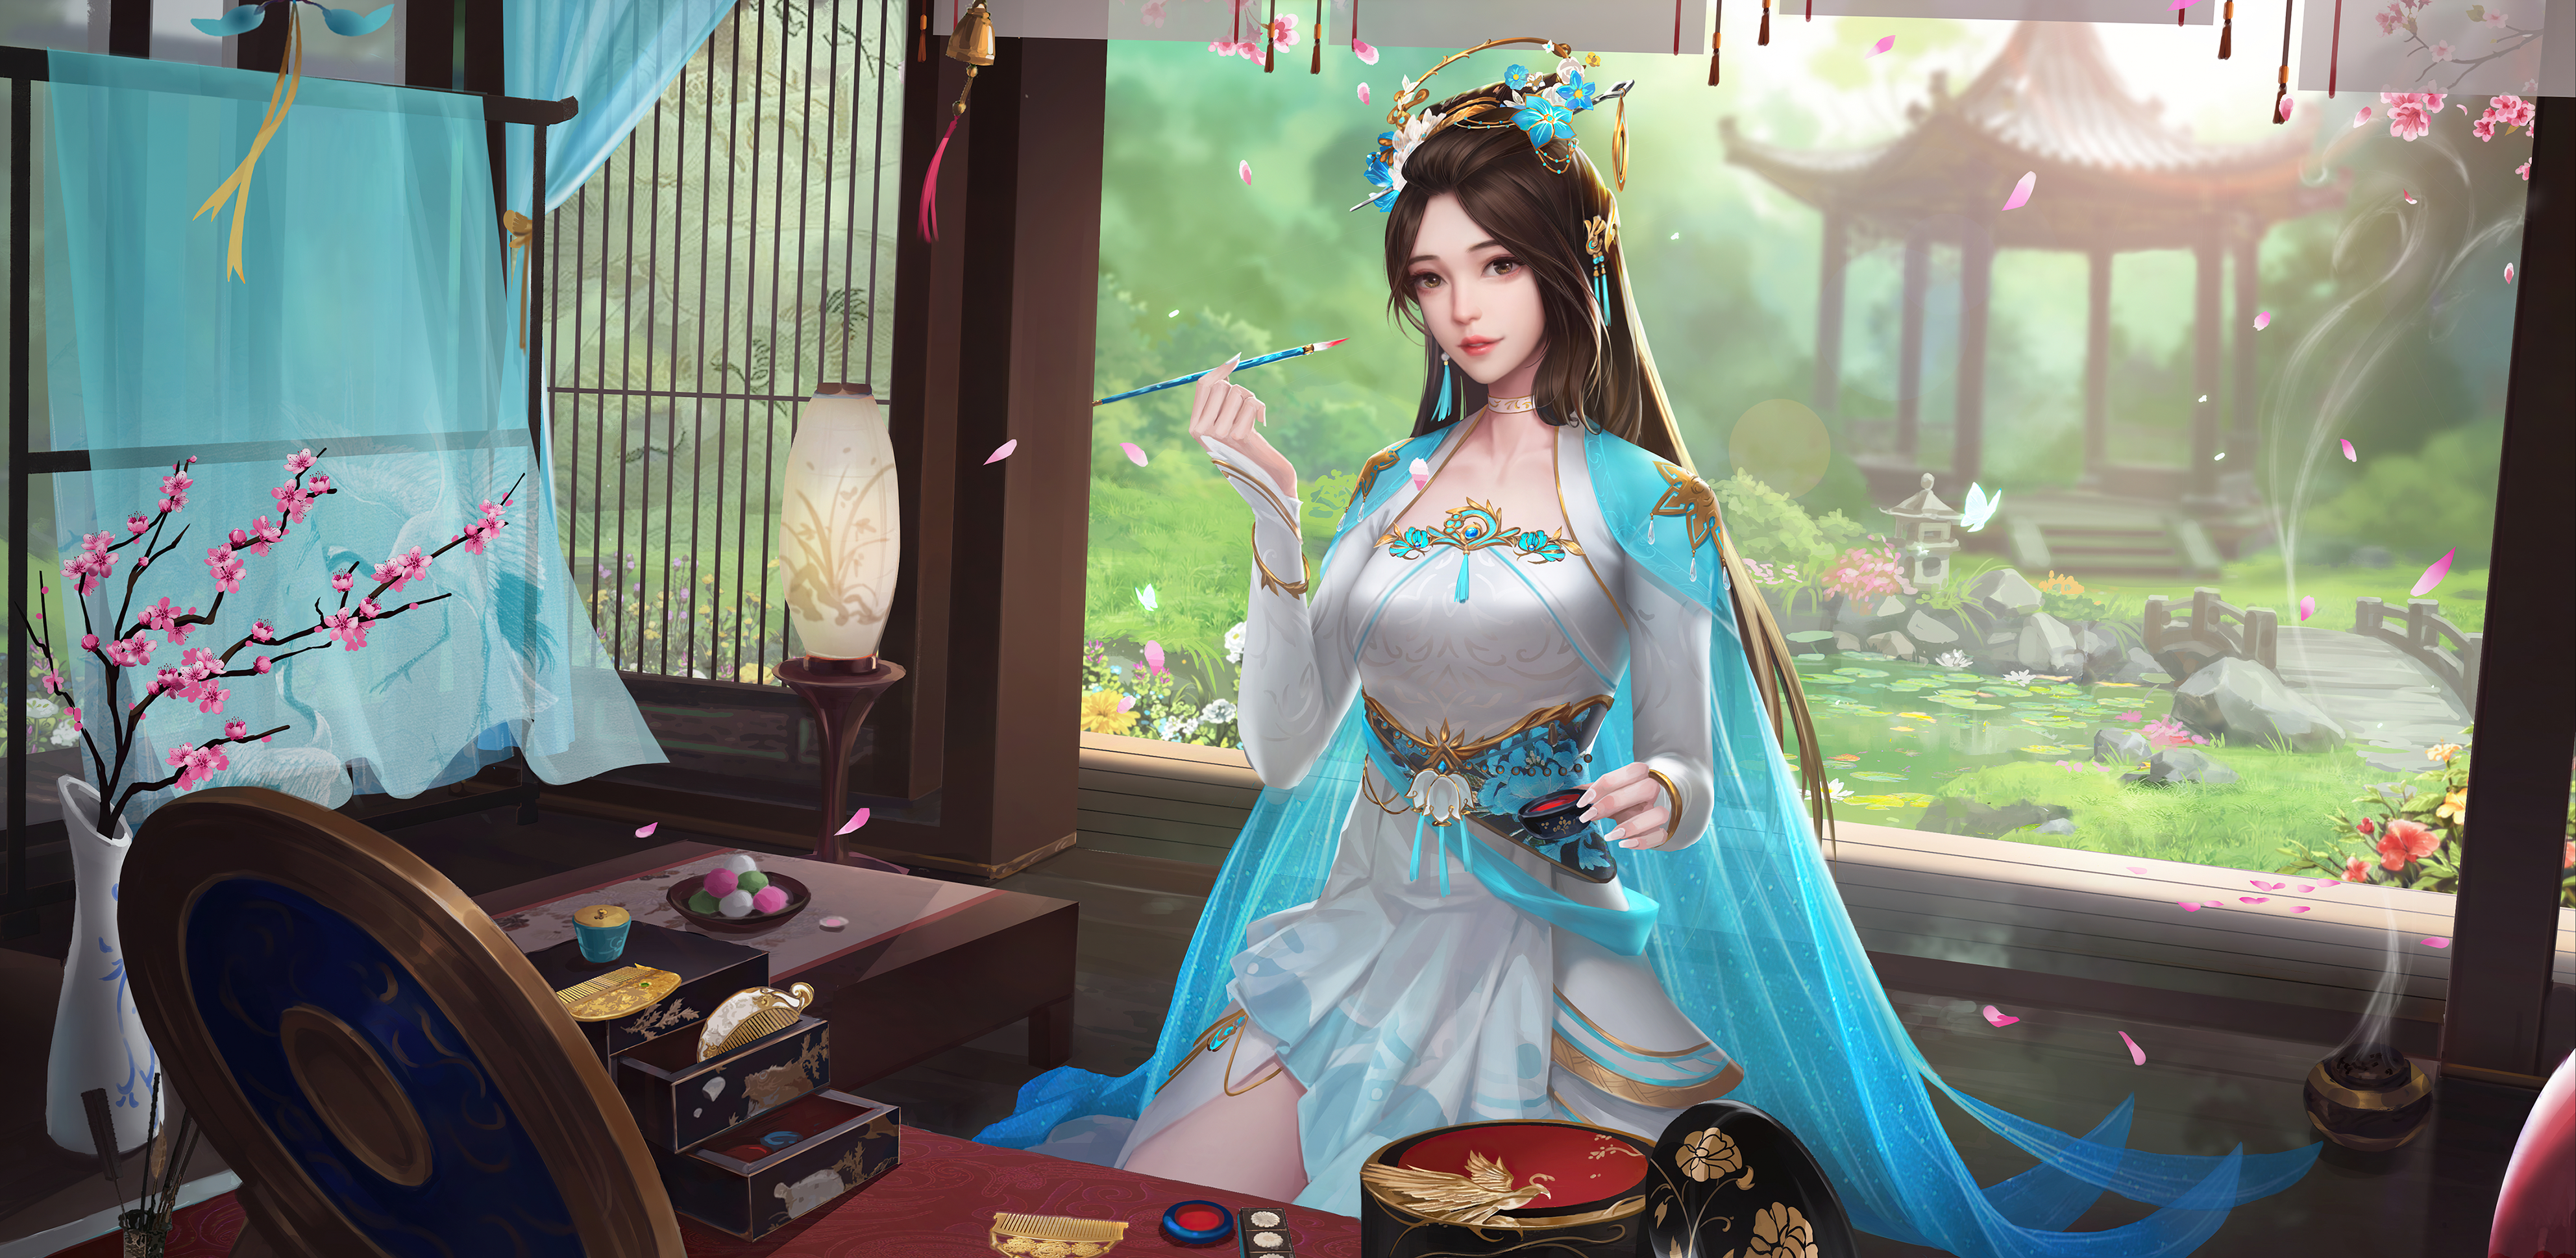 Three Kingdoms Video Game Characters Video Game Girls Video Game Art Petals Flowers Asian 3969x1939